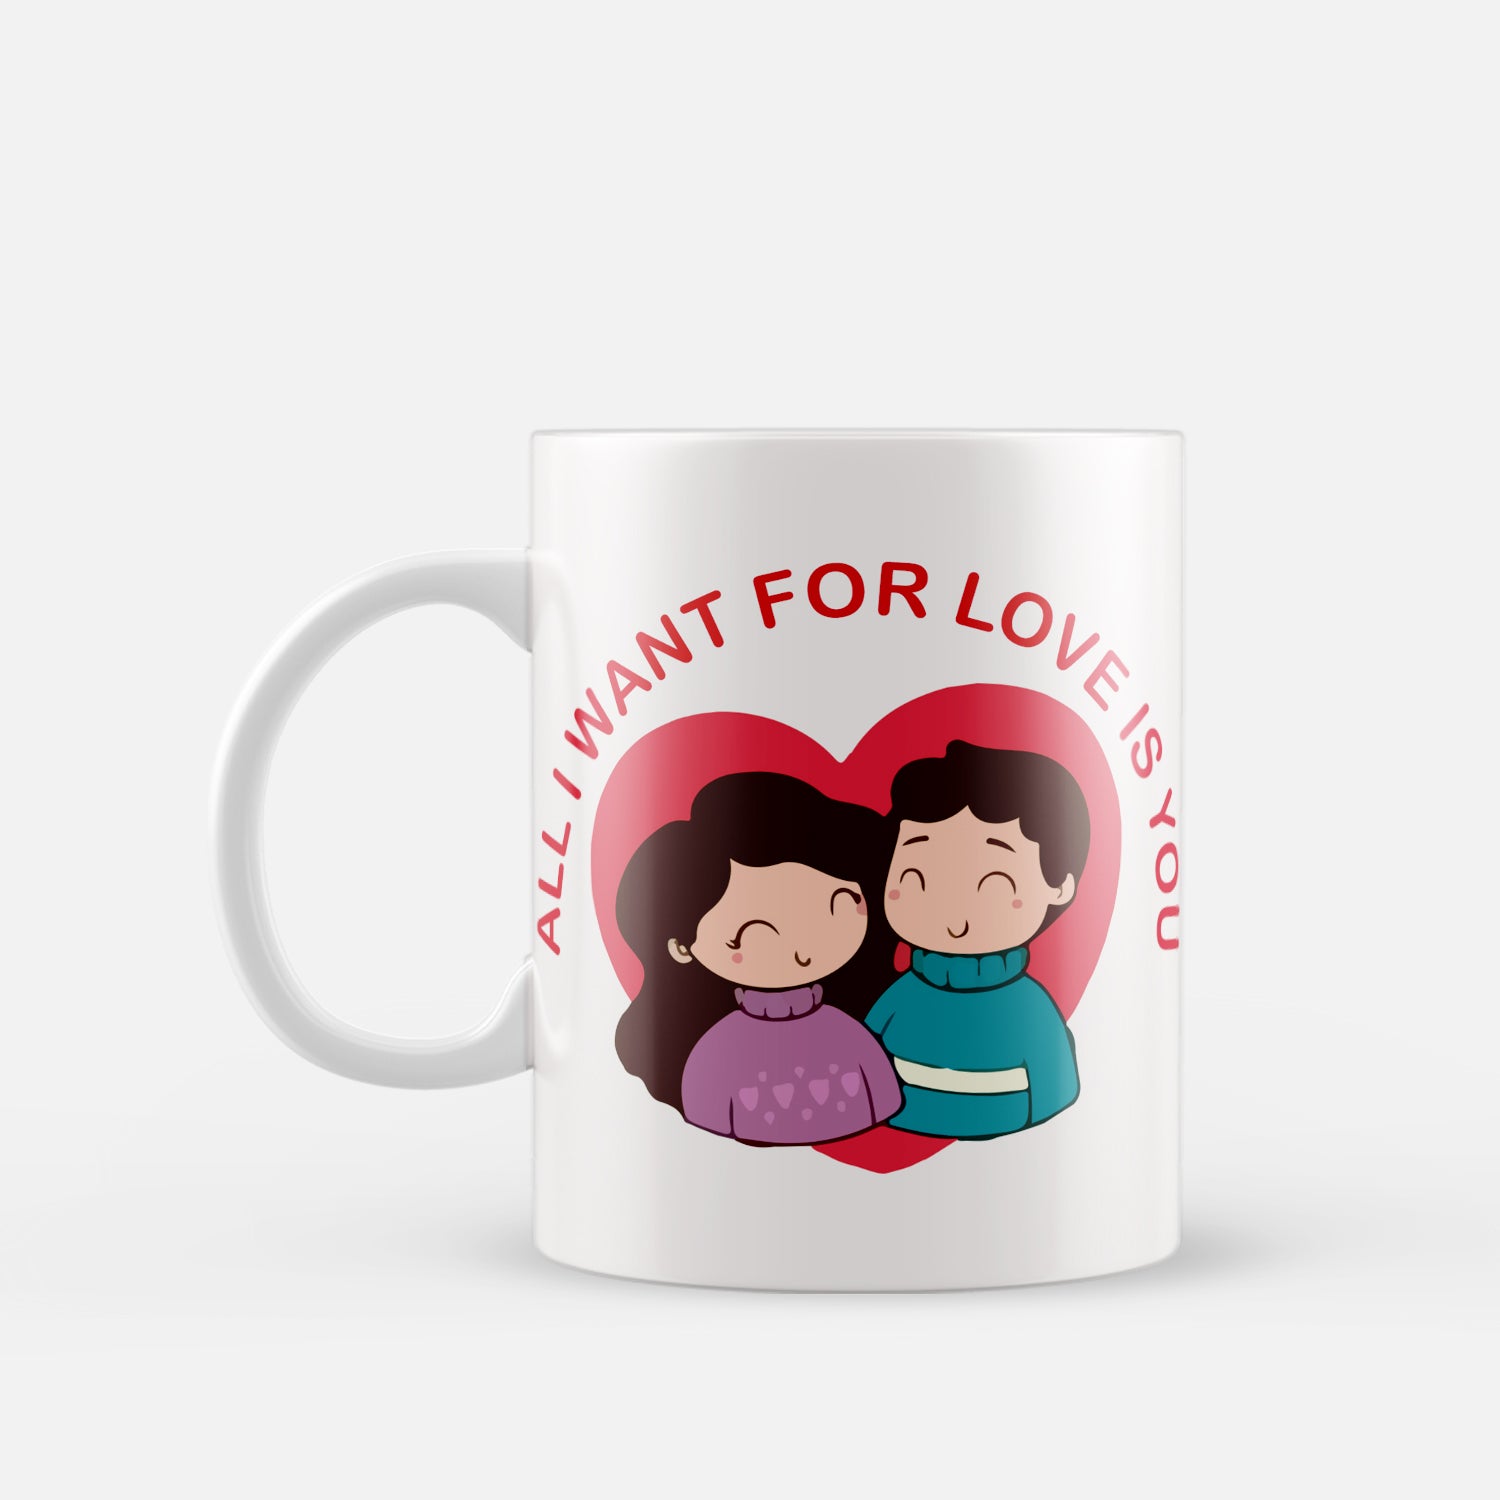 "All I want for Love is you" Valentine Love theme Ceramic Coffee Mug 2